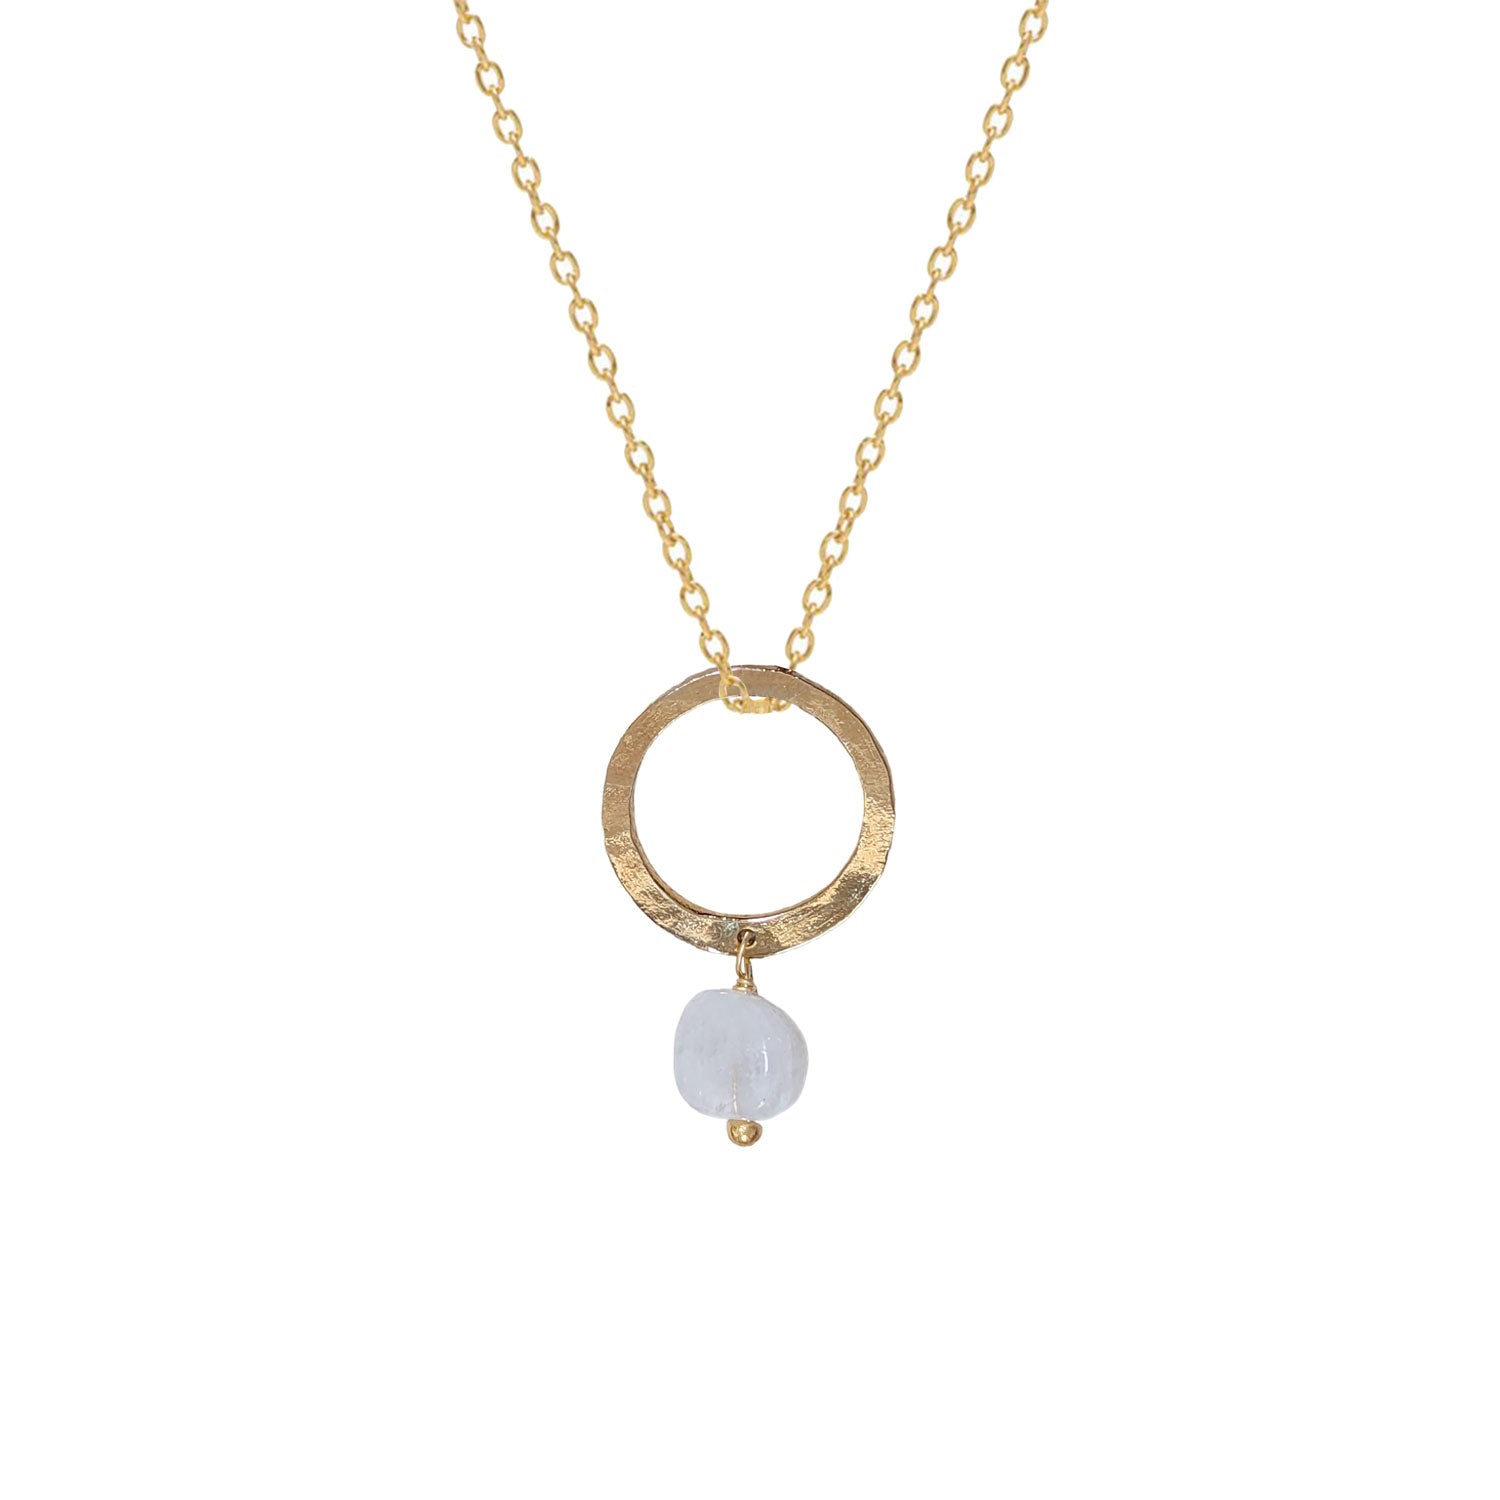 Bulan Pendant with Moonstone on Long Simple Chain